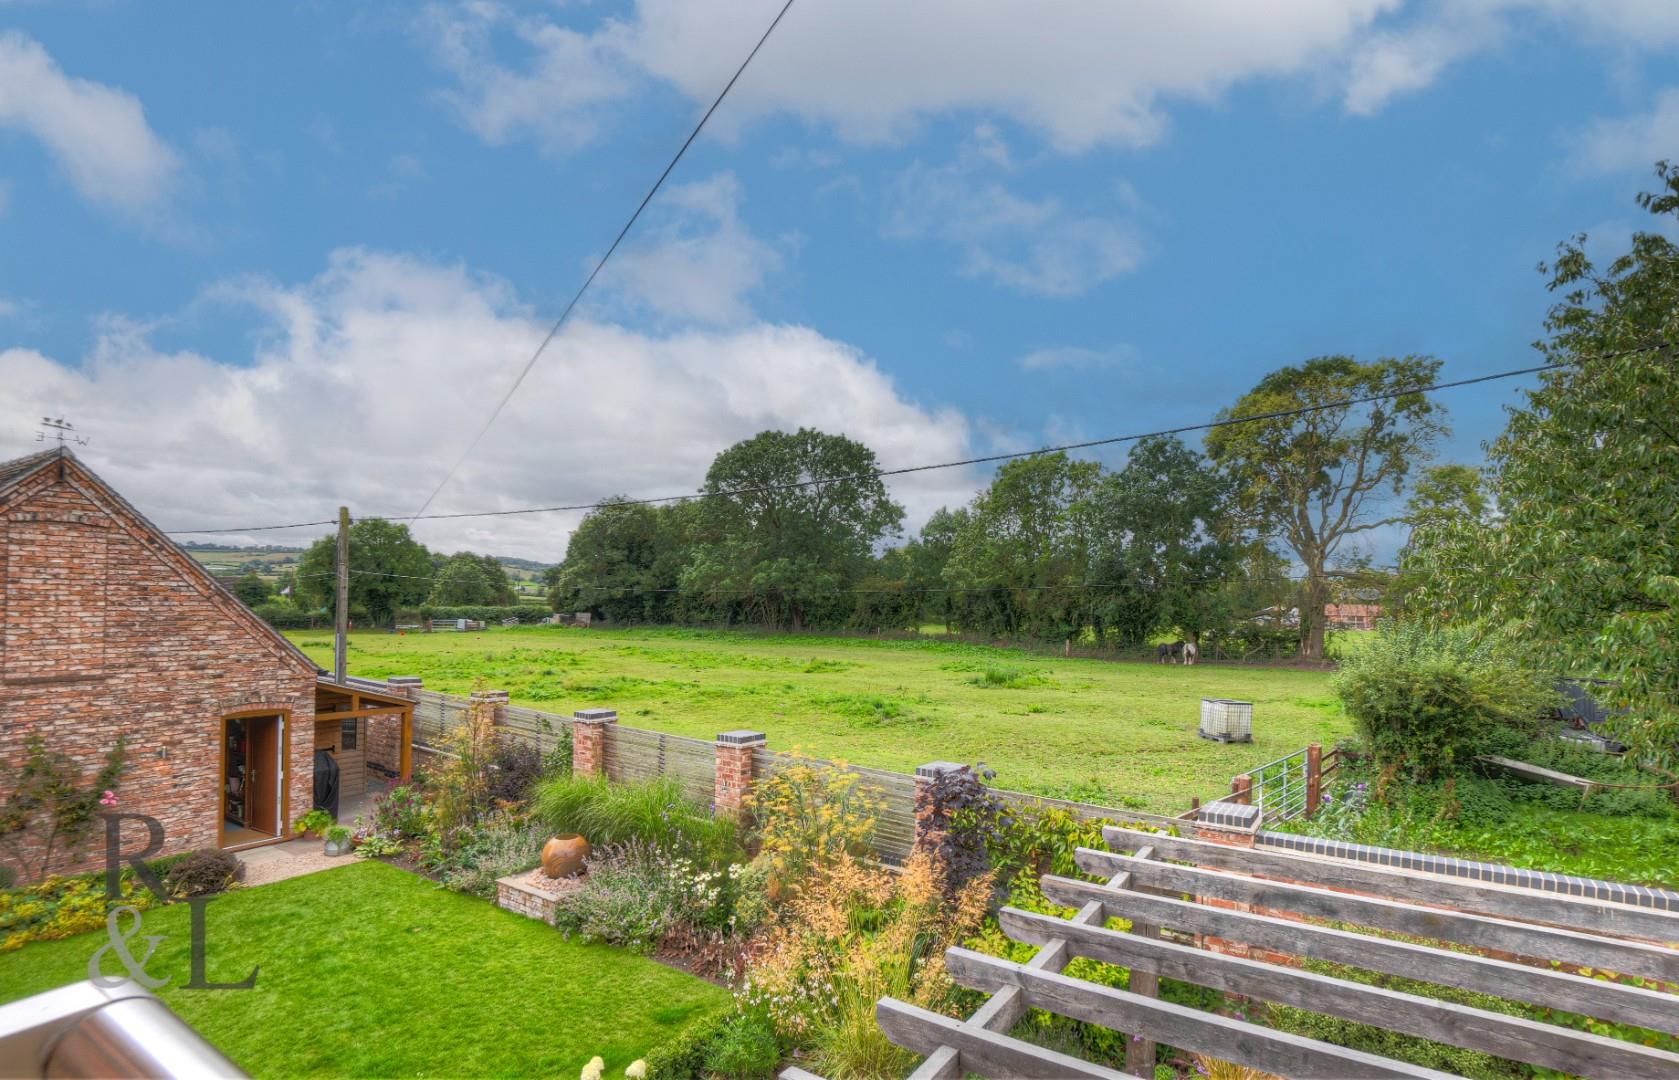 Property image for Dairy Lane, Nether Broughton